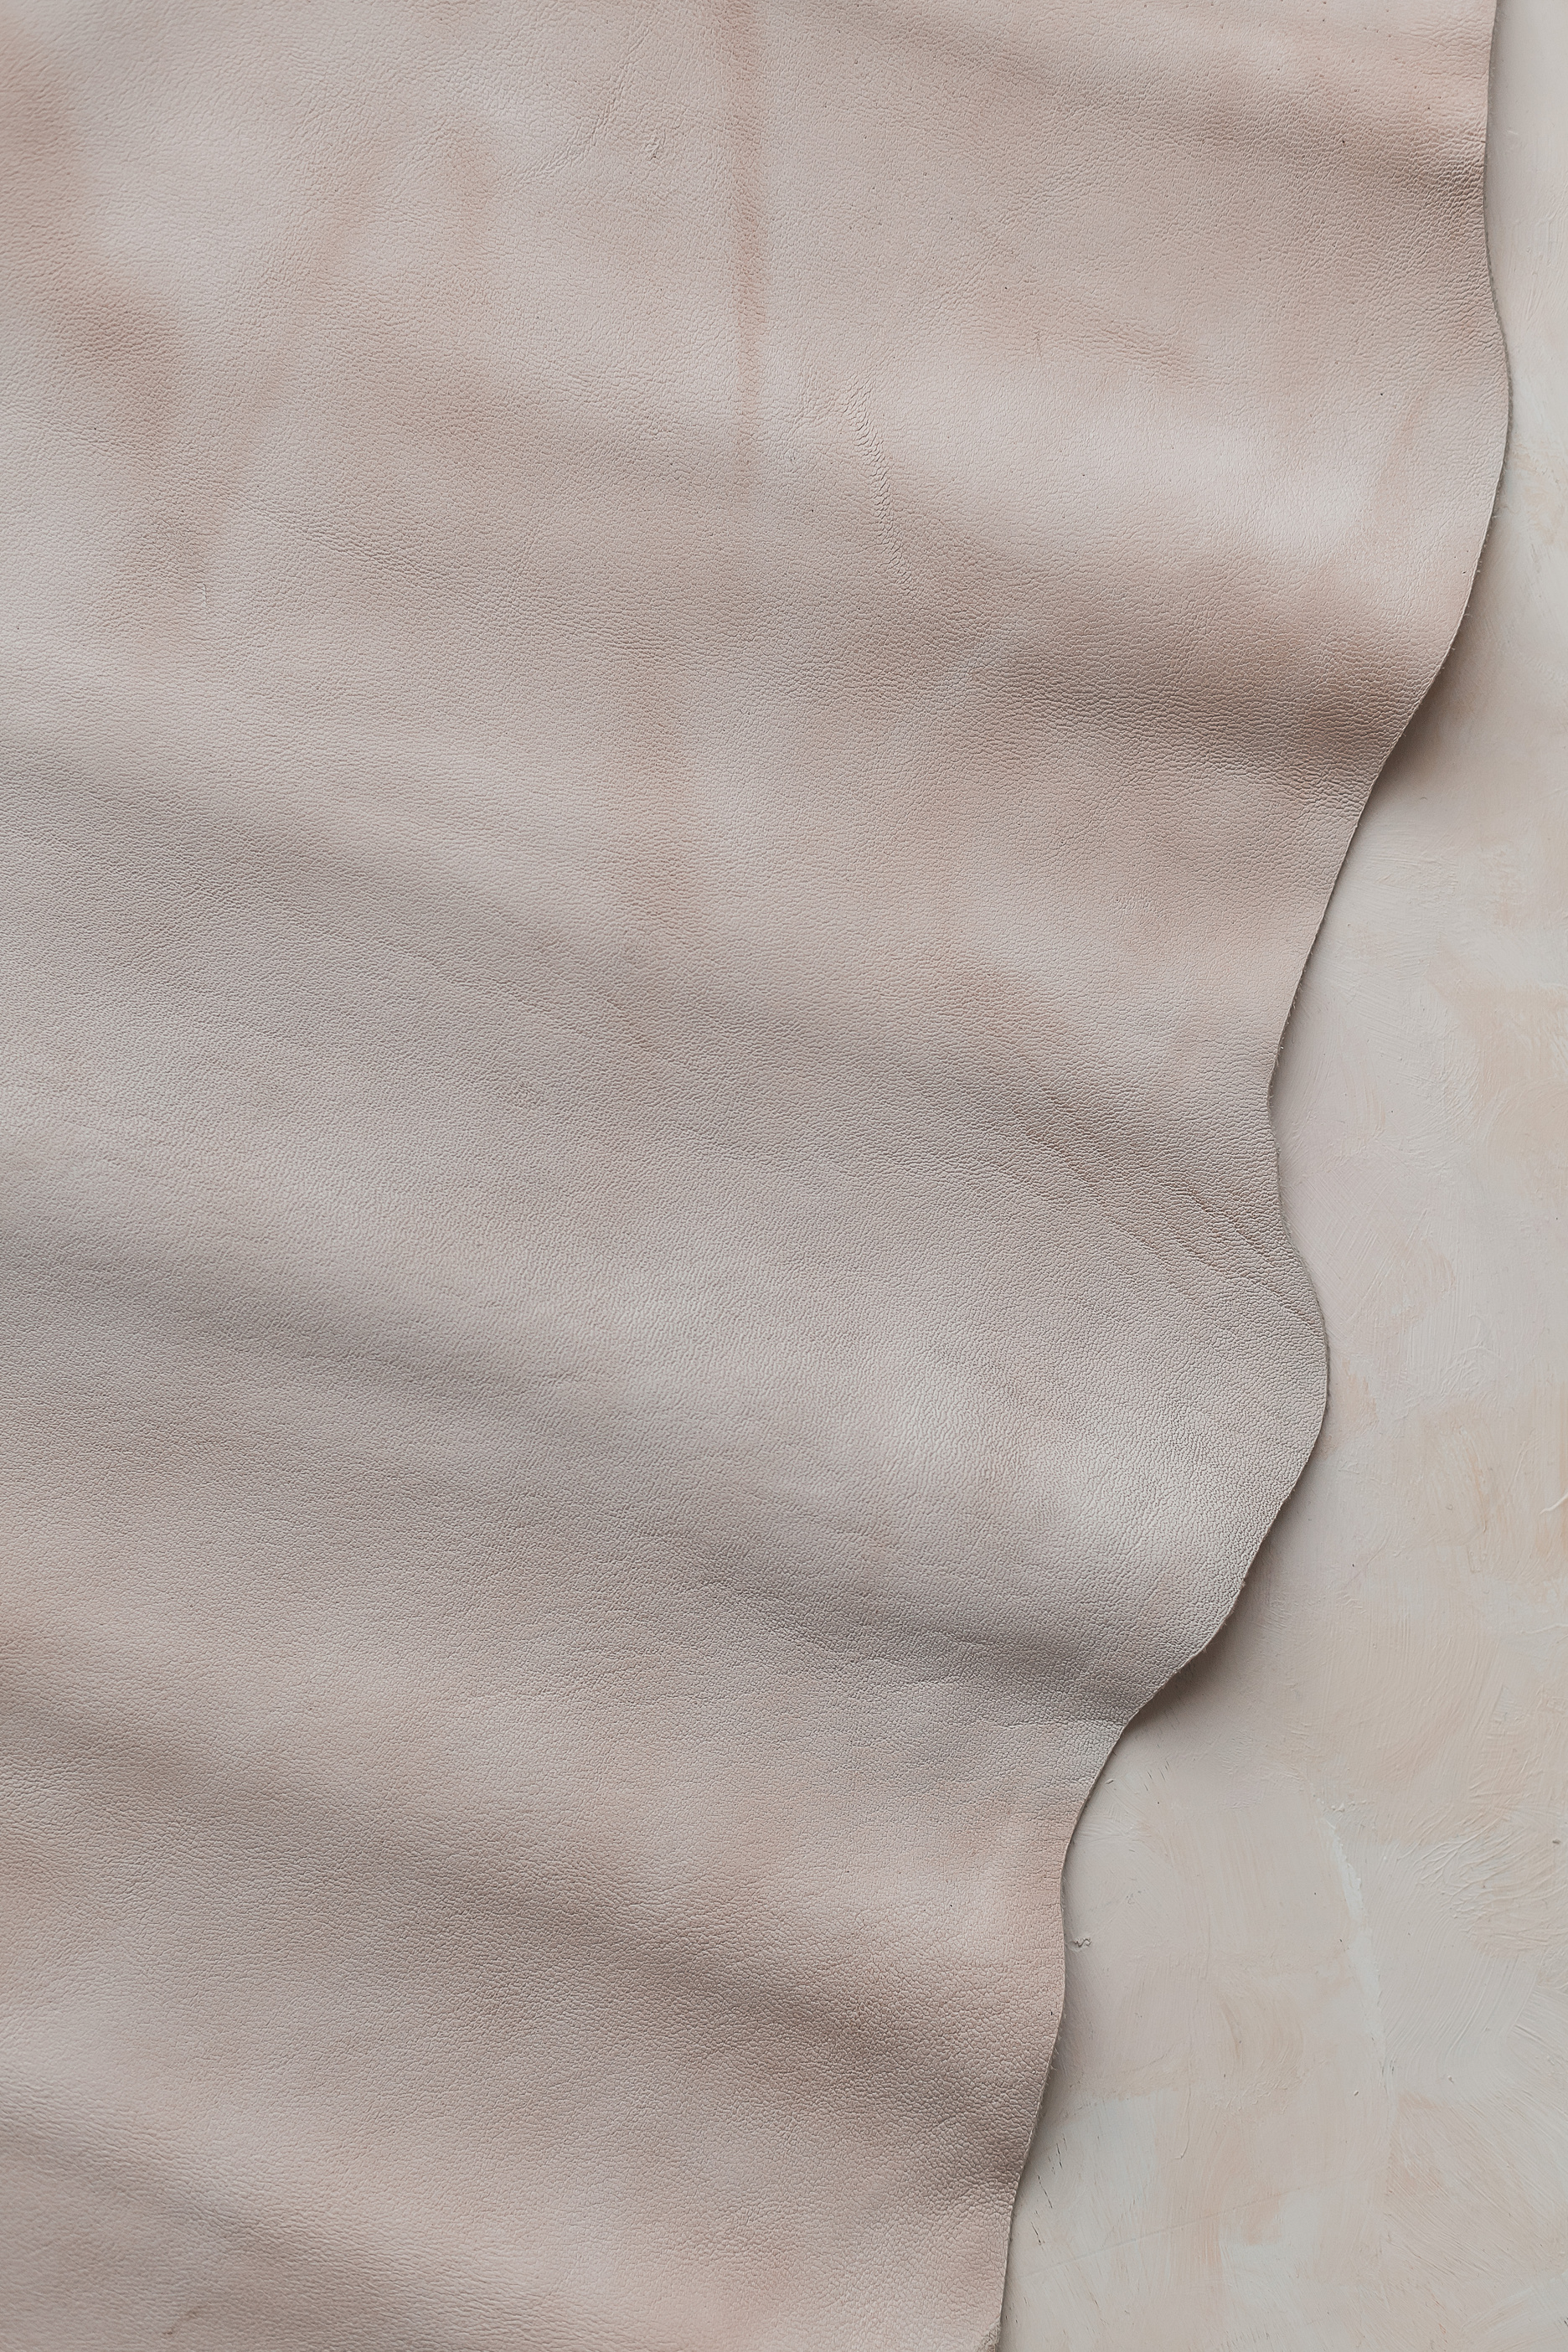 Beige Leather Fabric